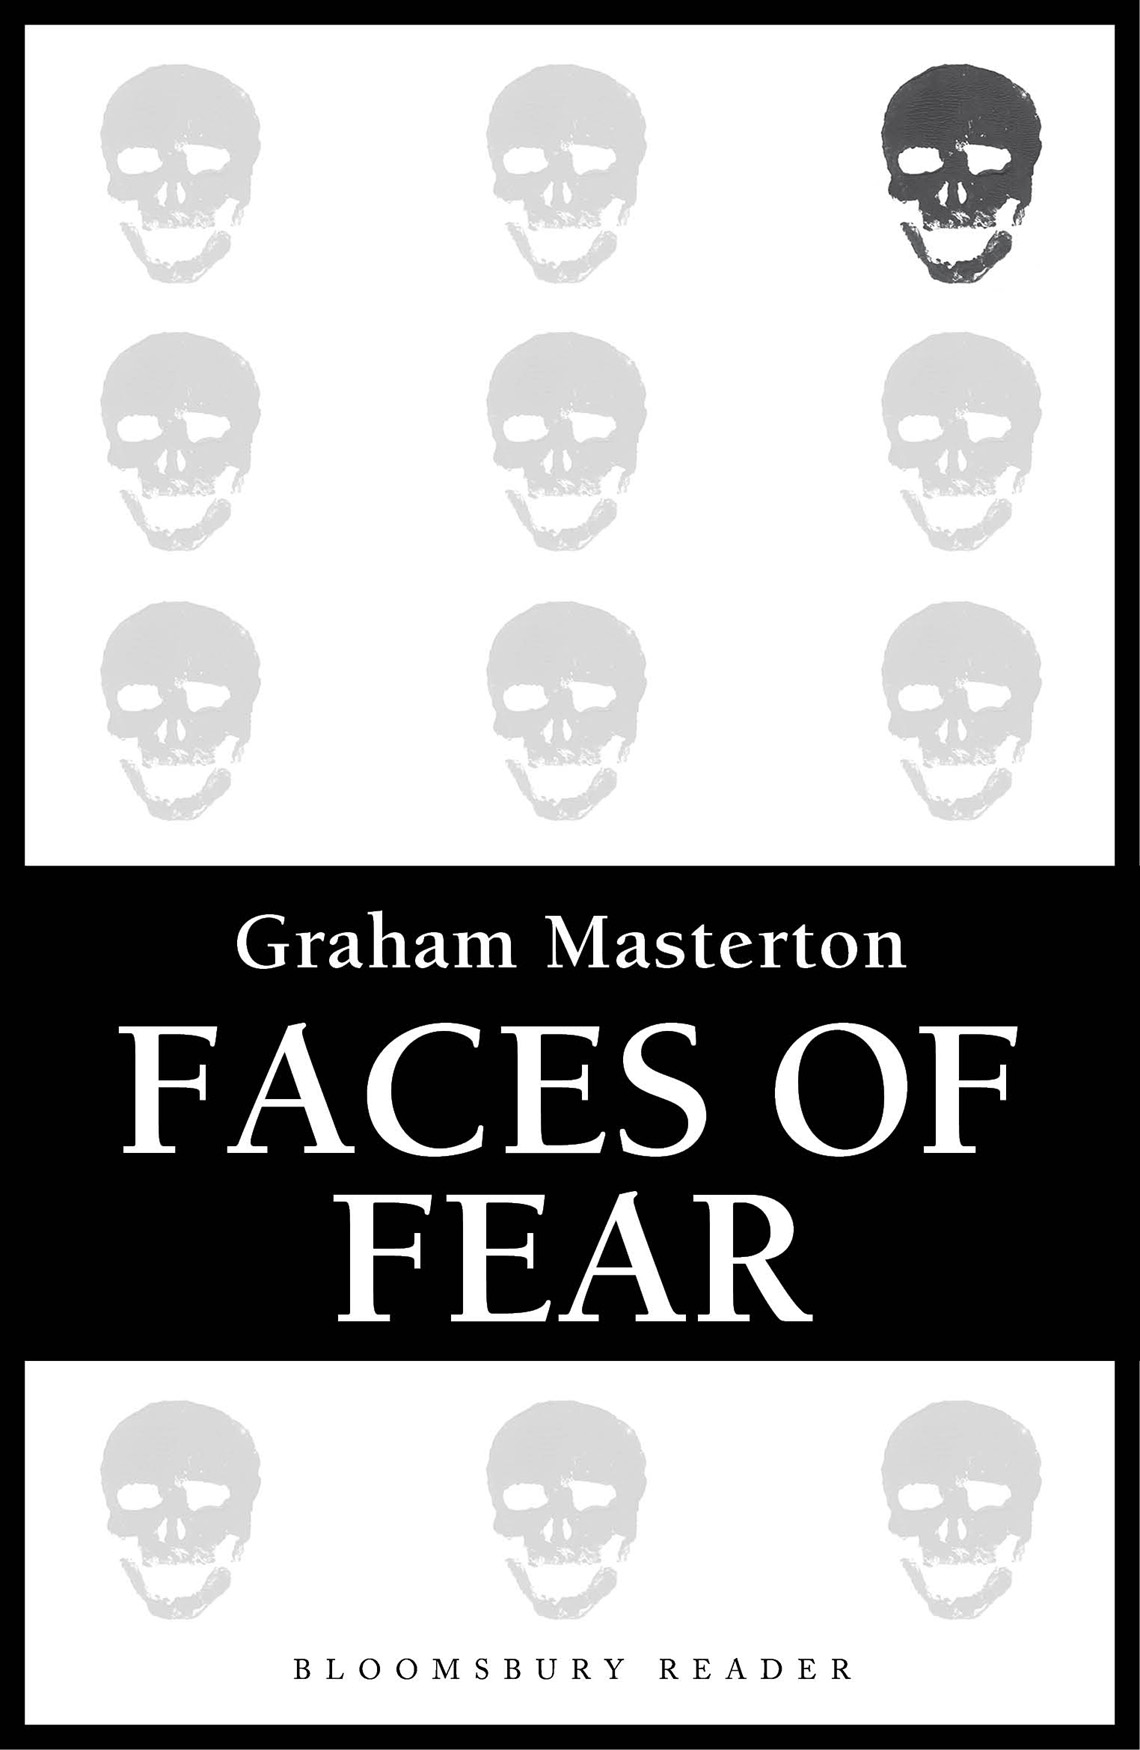 Faces of Fear (2012) by Graham Masterton